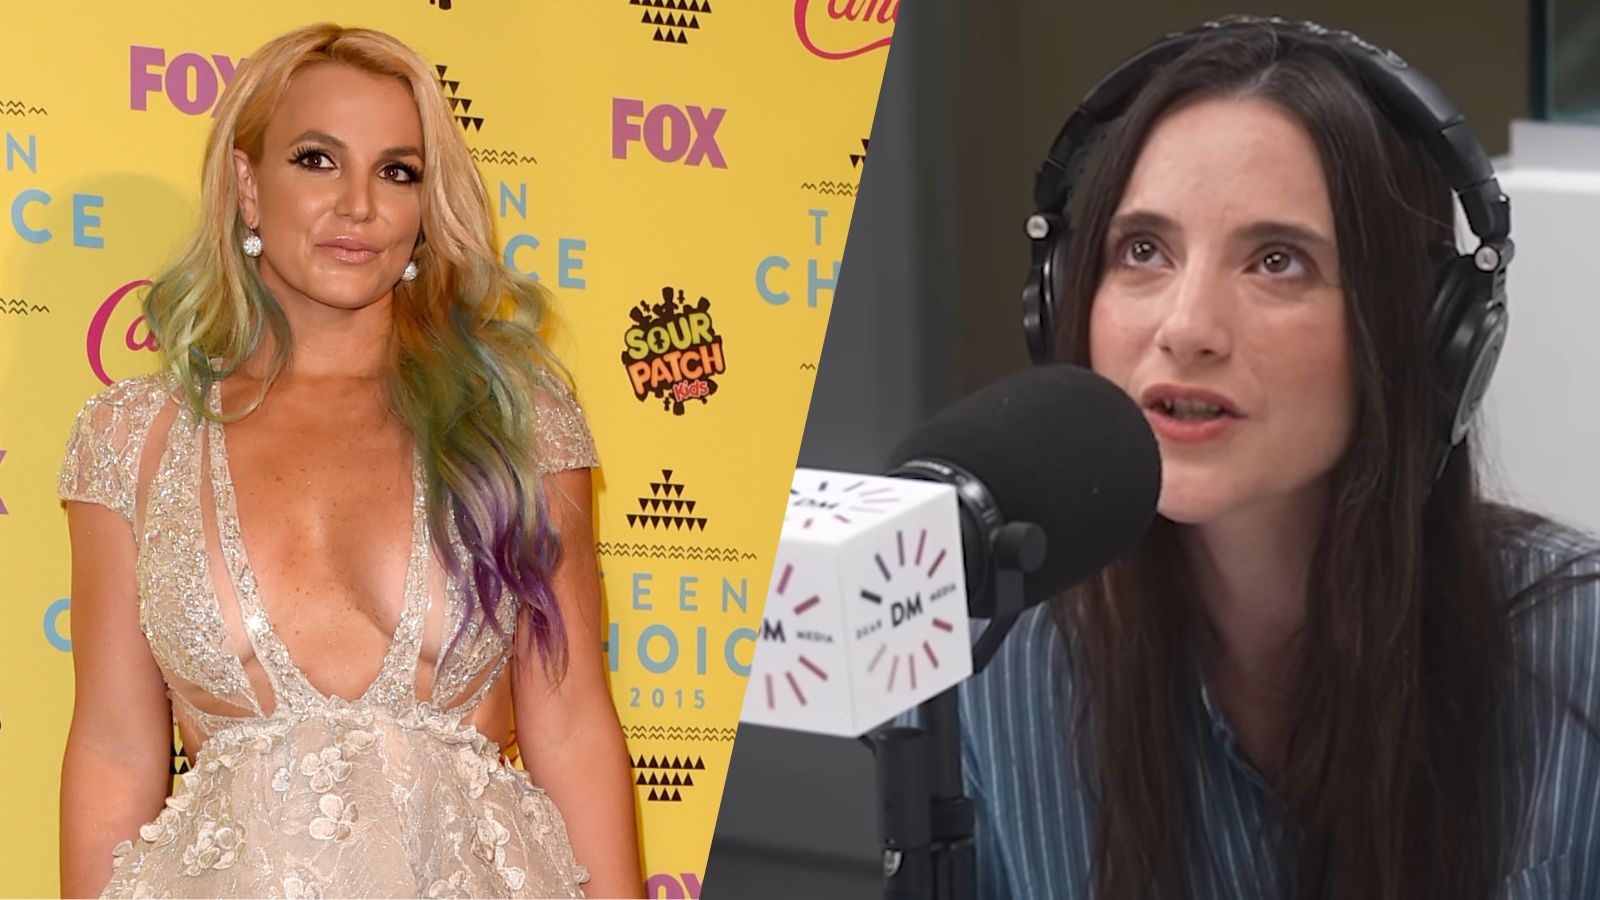 Britney Spears dubbed Queen of Accountability by fans for apology issued to Alexa Nikolas